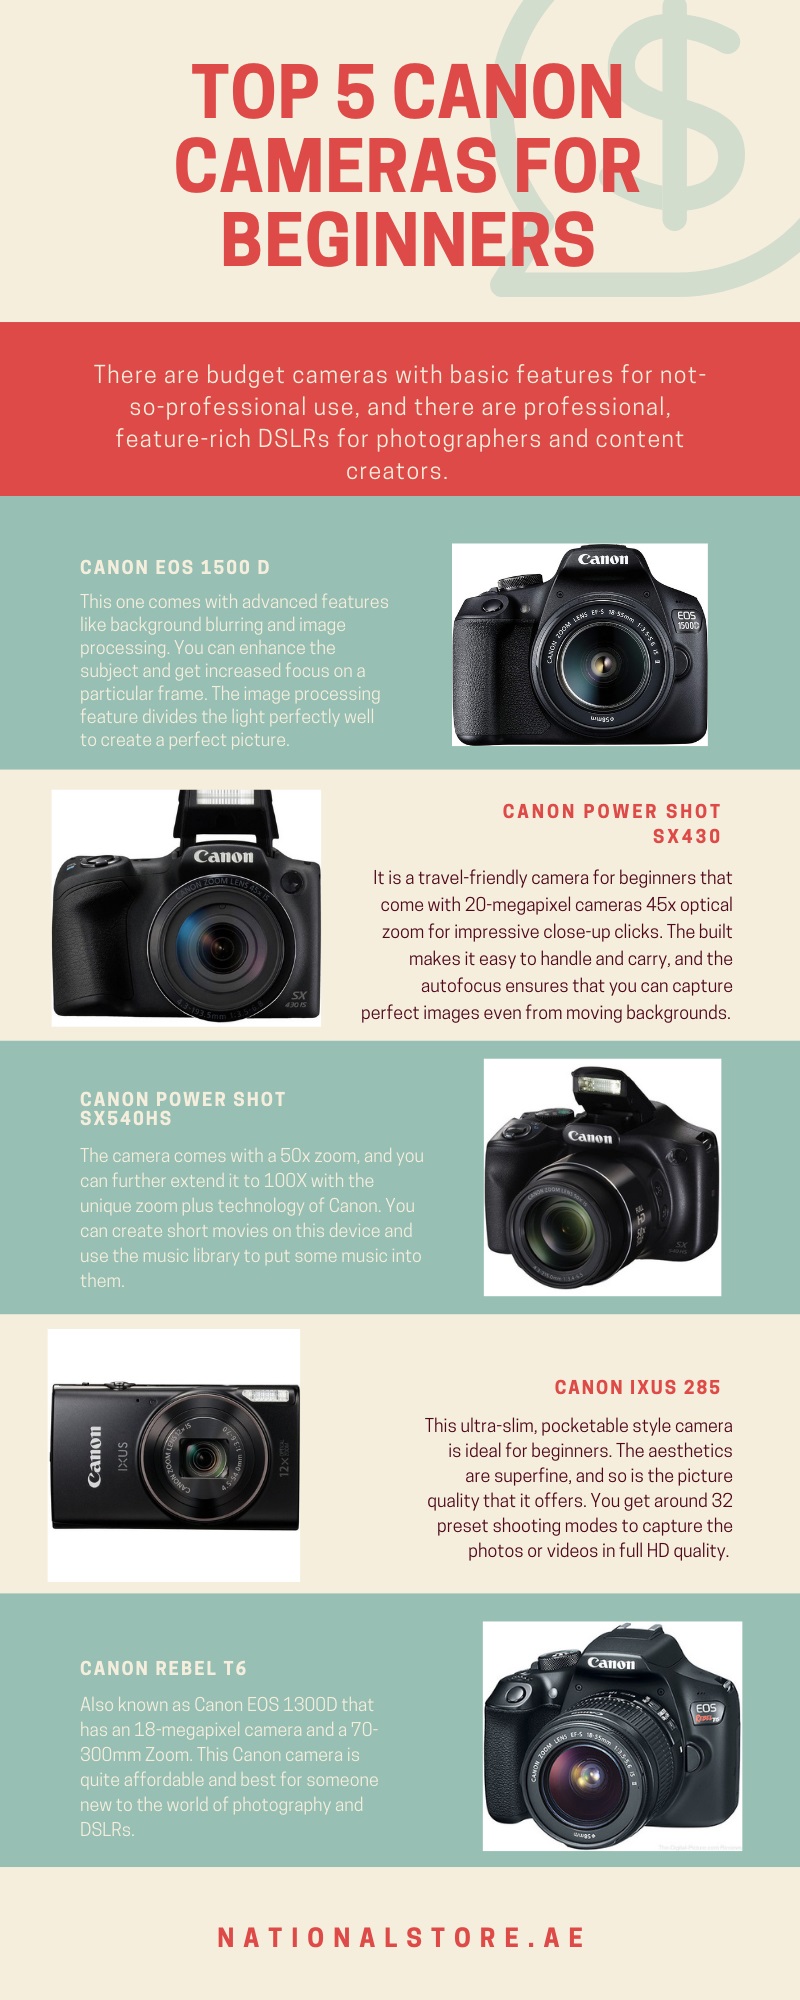 Top 5 Canon Cameras for Beginners There are budget cameras with basic features for not-so-professional use, and there are professional, feature-rich DSLRs for photographers and content creators. Before you visit a store and explore a canon camera to buy, consider the options listed below: by National Store LLC